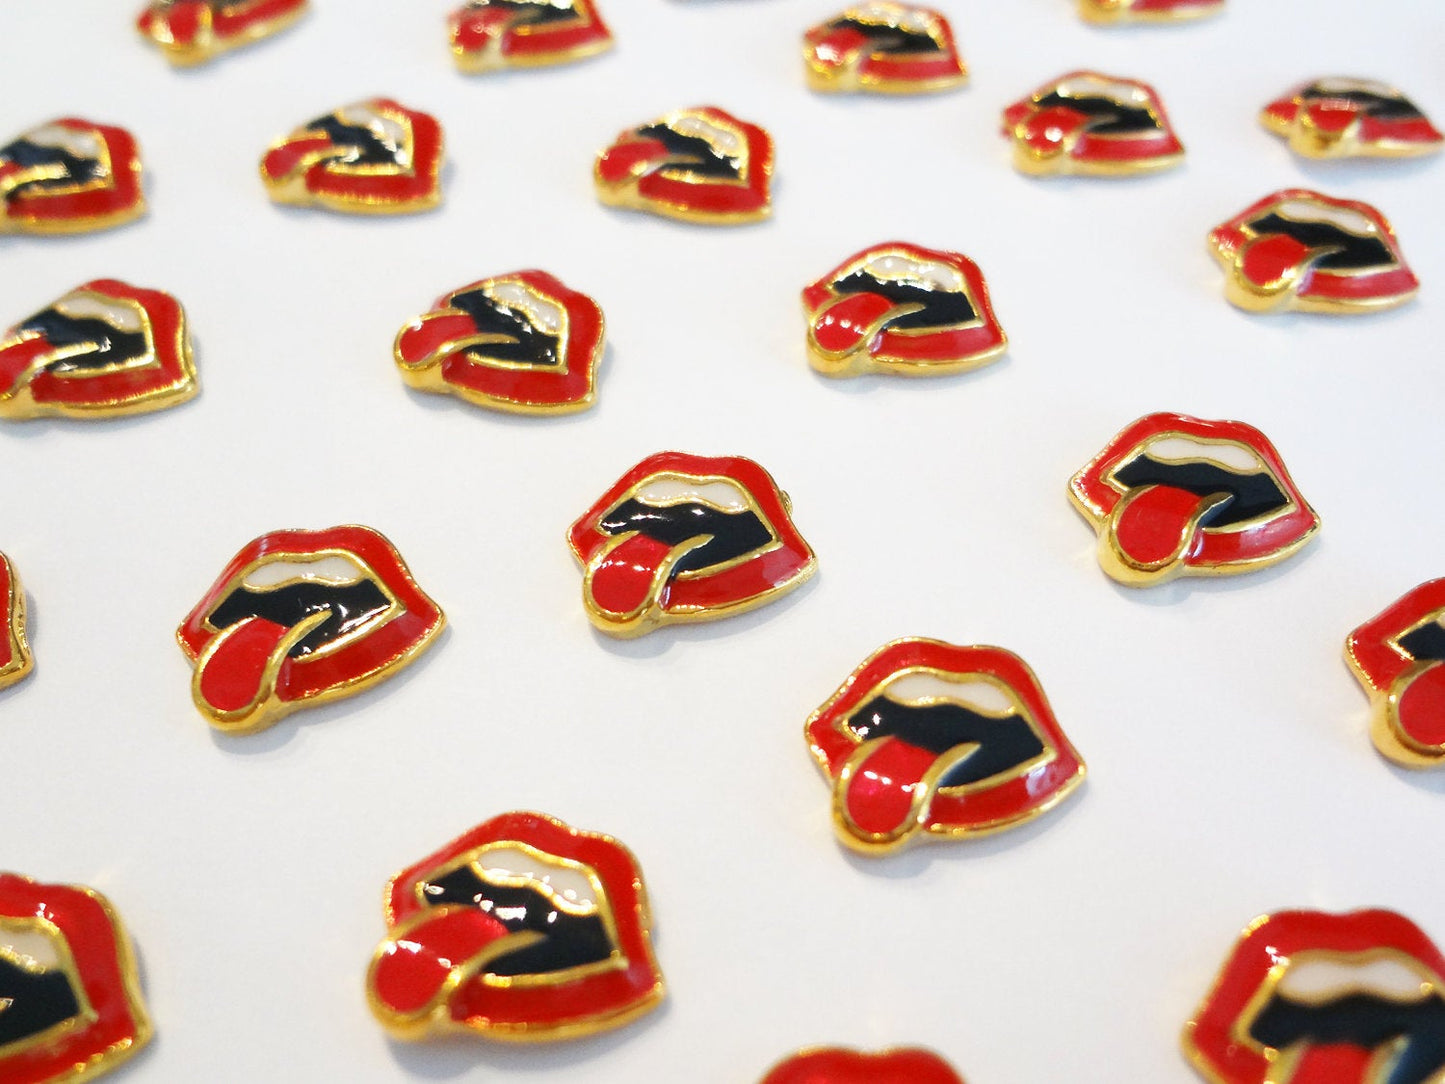 10x8mm 3D Rock and Roll Tongue and Lip